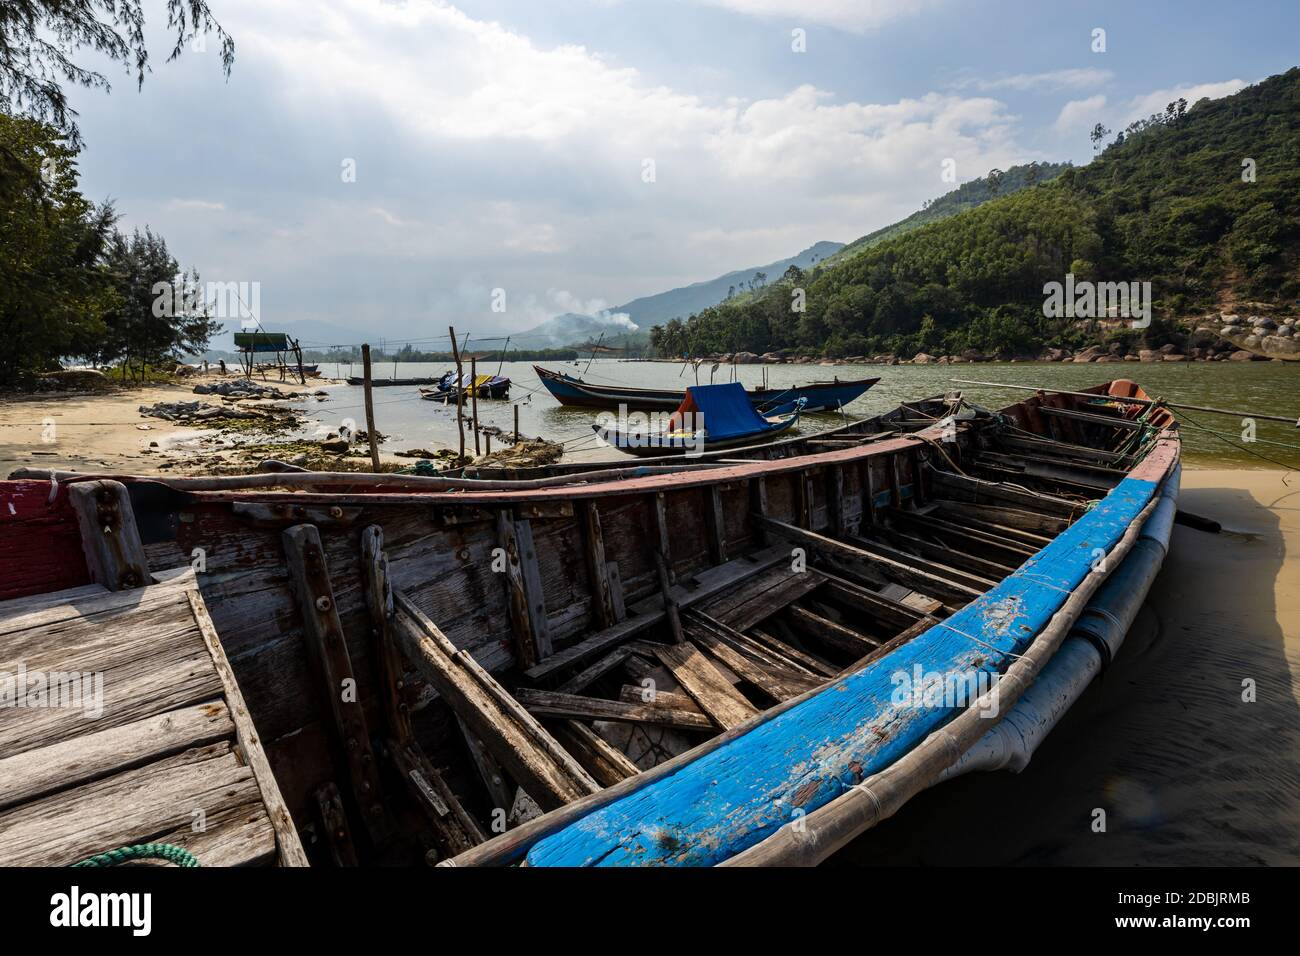 The port of Lang Co in Vietnam Stock Photo